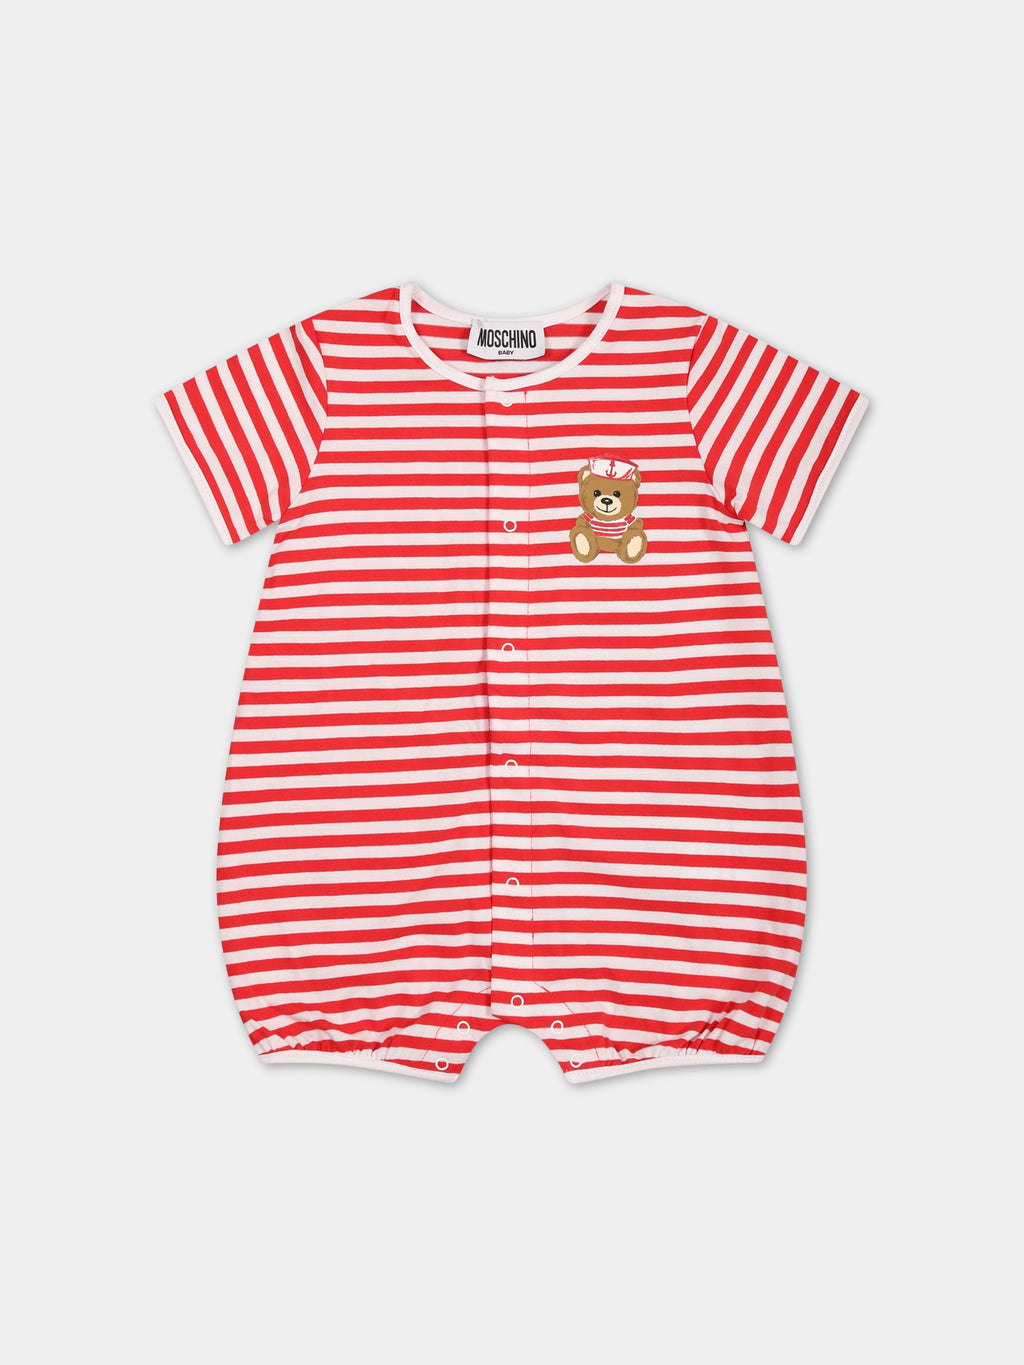 Multicolor romper for baby boy with Teddy Bear and logo